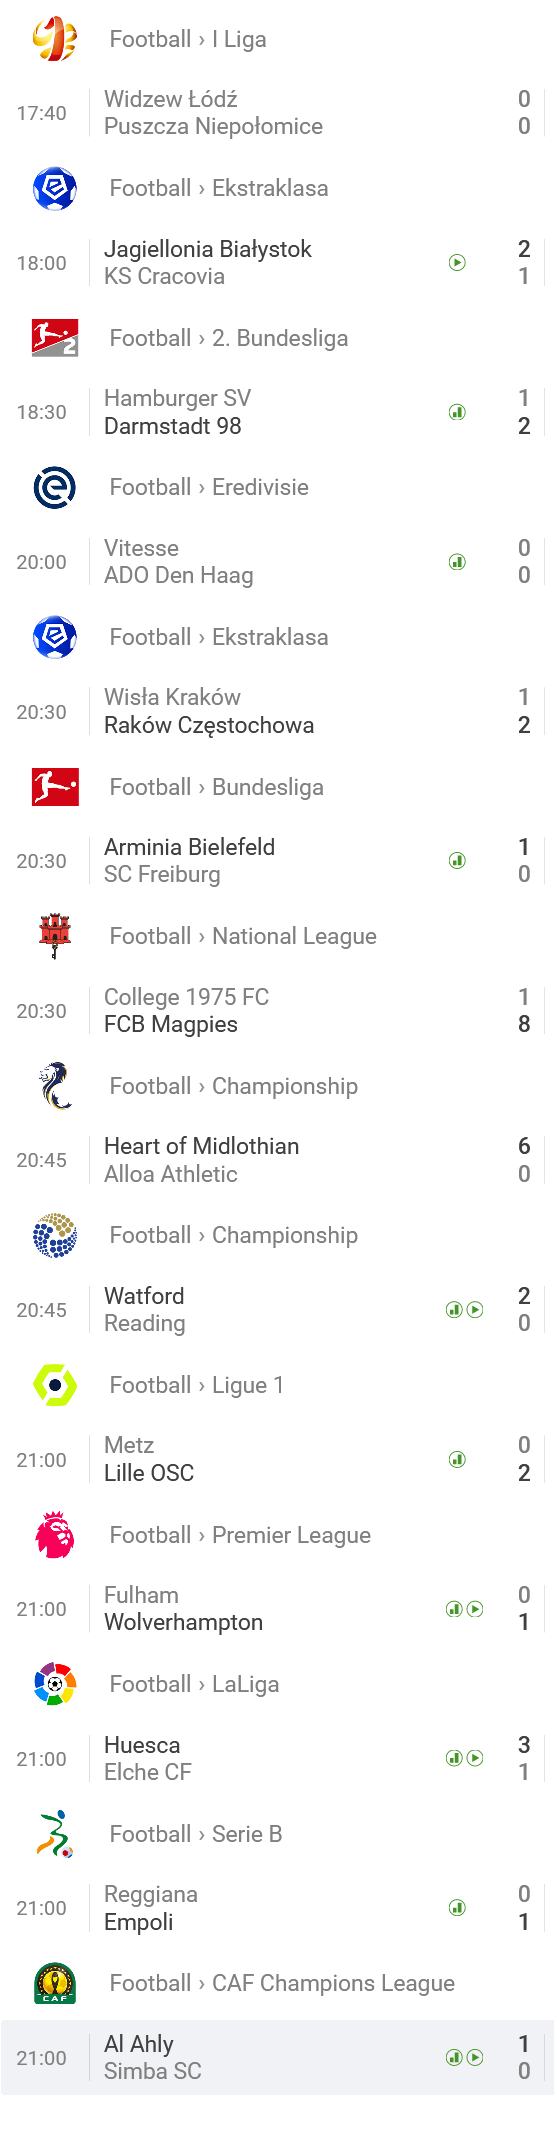 Screenshot_2021-04-10 Livescore Live scores and results for selected games - SofaScore(1).png